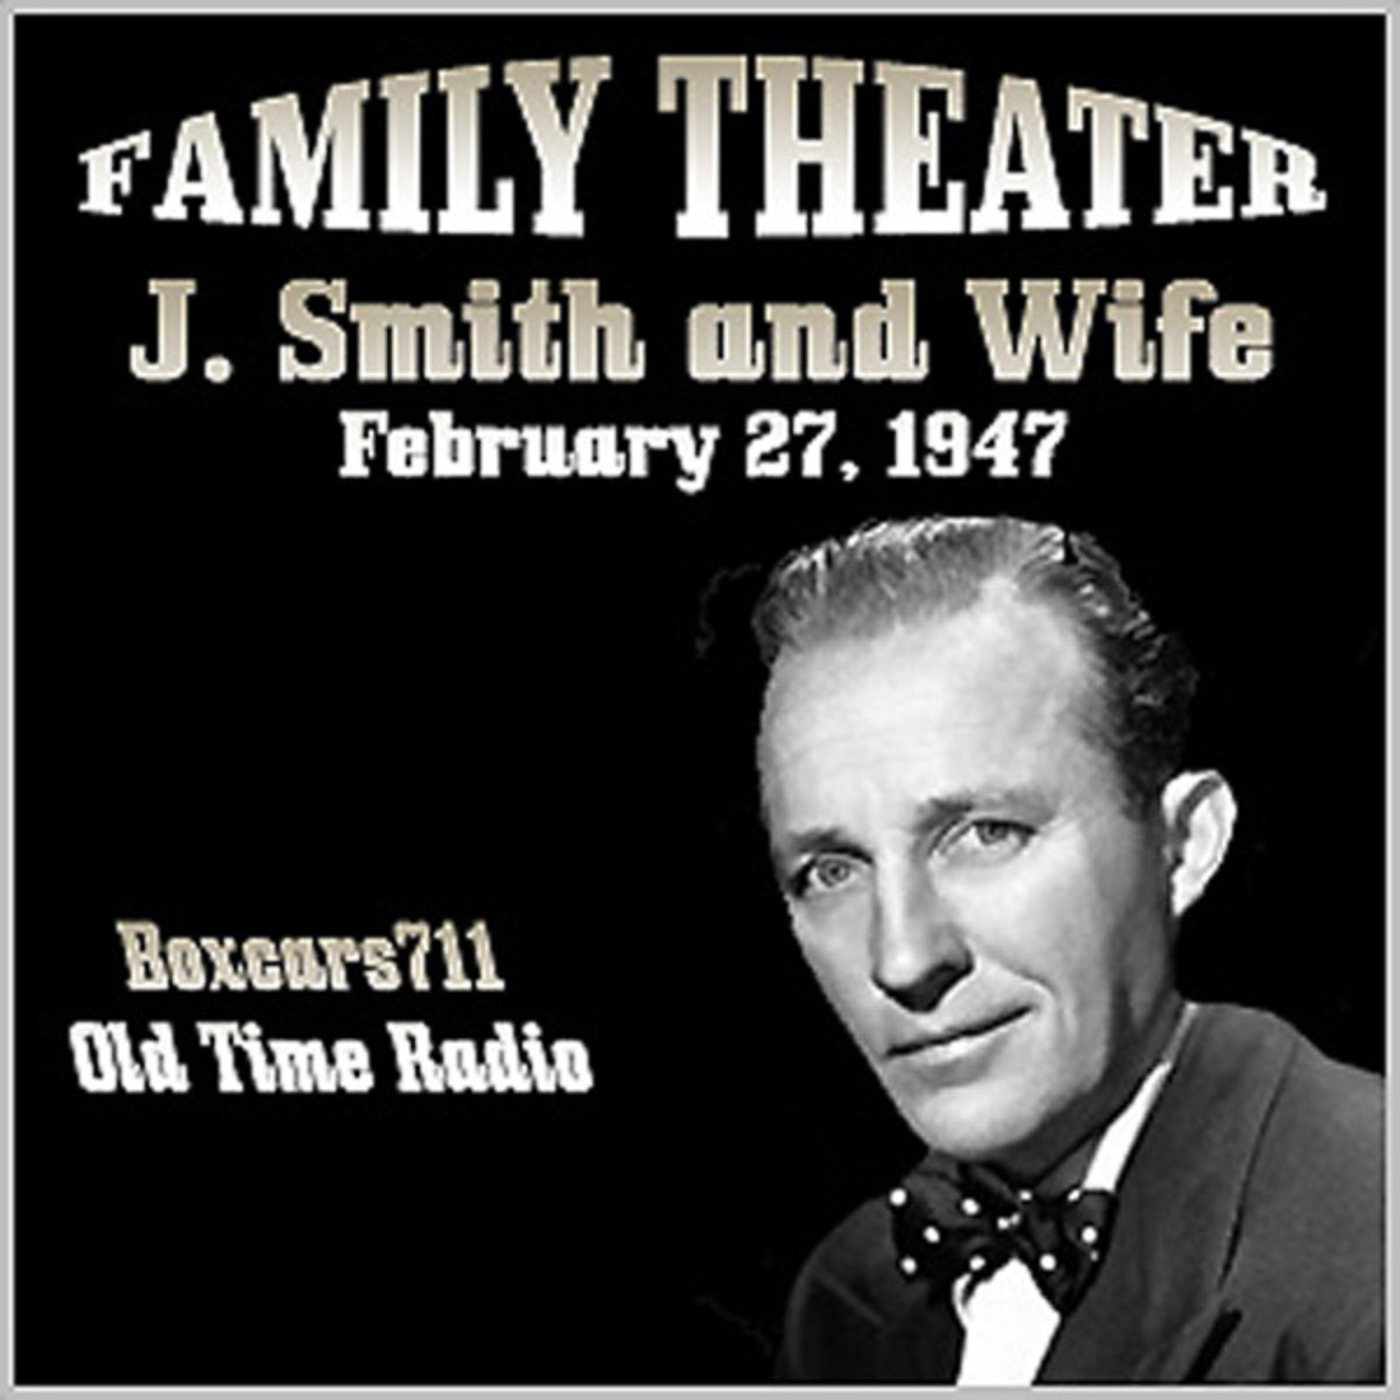 Episode 9646: Family Theater - 